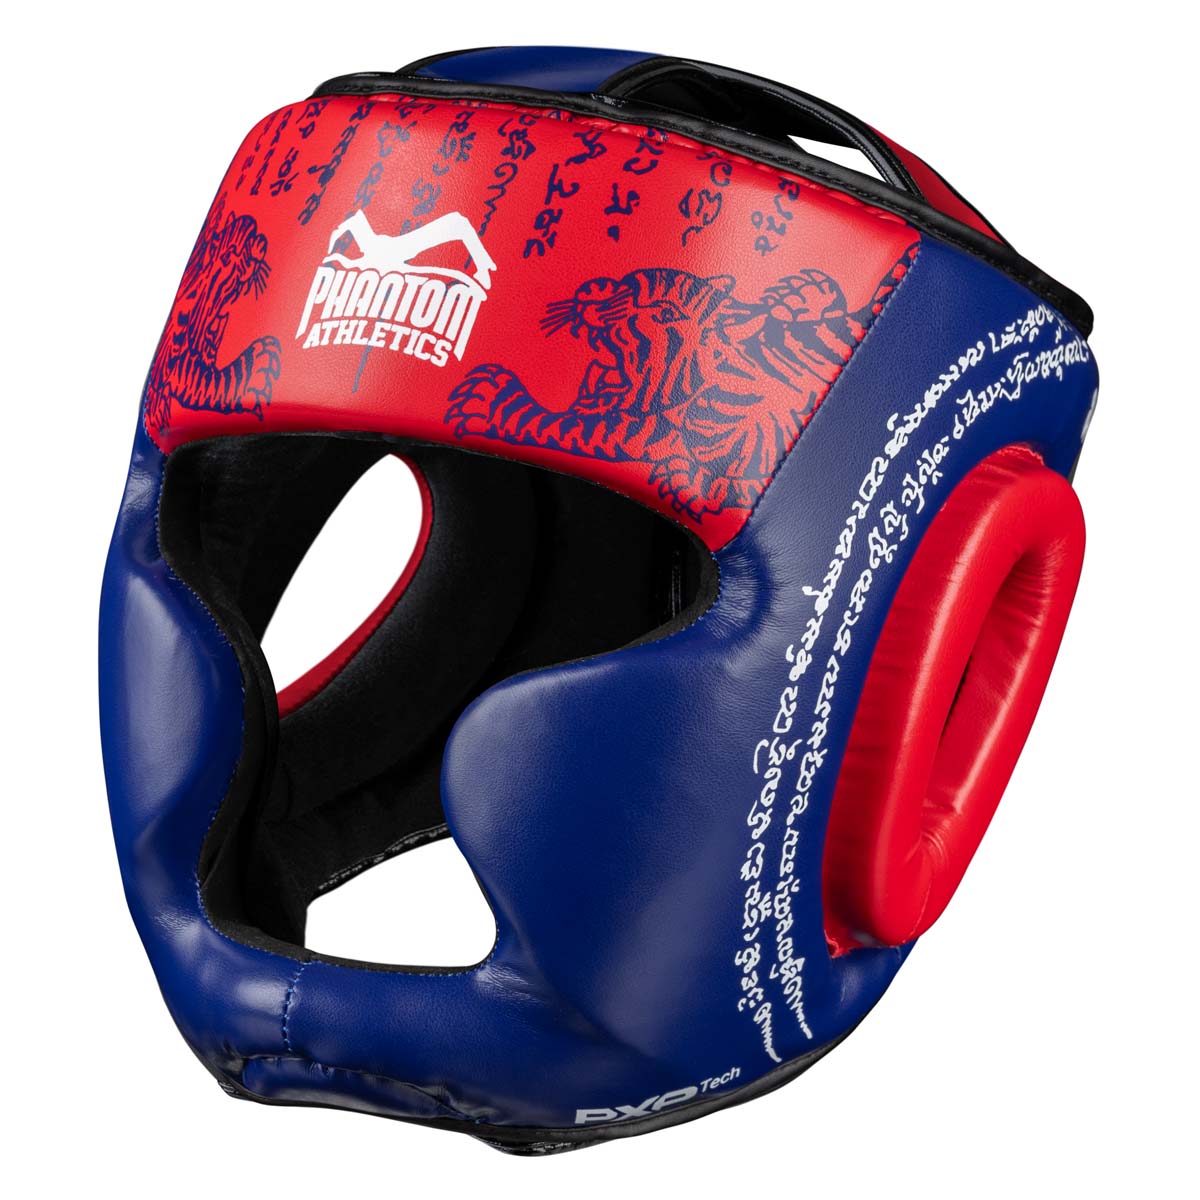 Phantom Muay Thai head protection for Thai boxing and MMA sparring, competition and training. In the traditional Sak Yant design and the color blue/red.